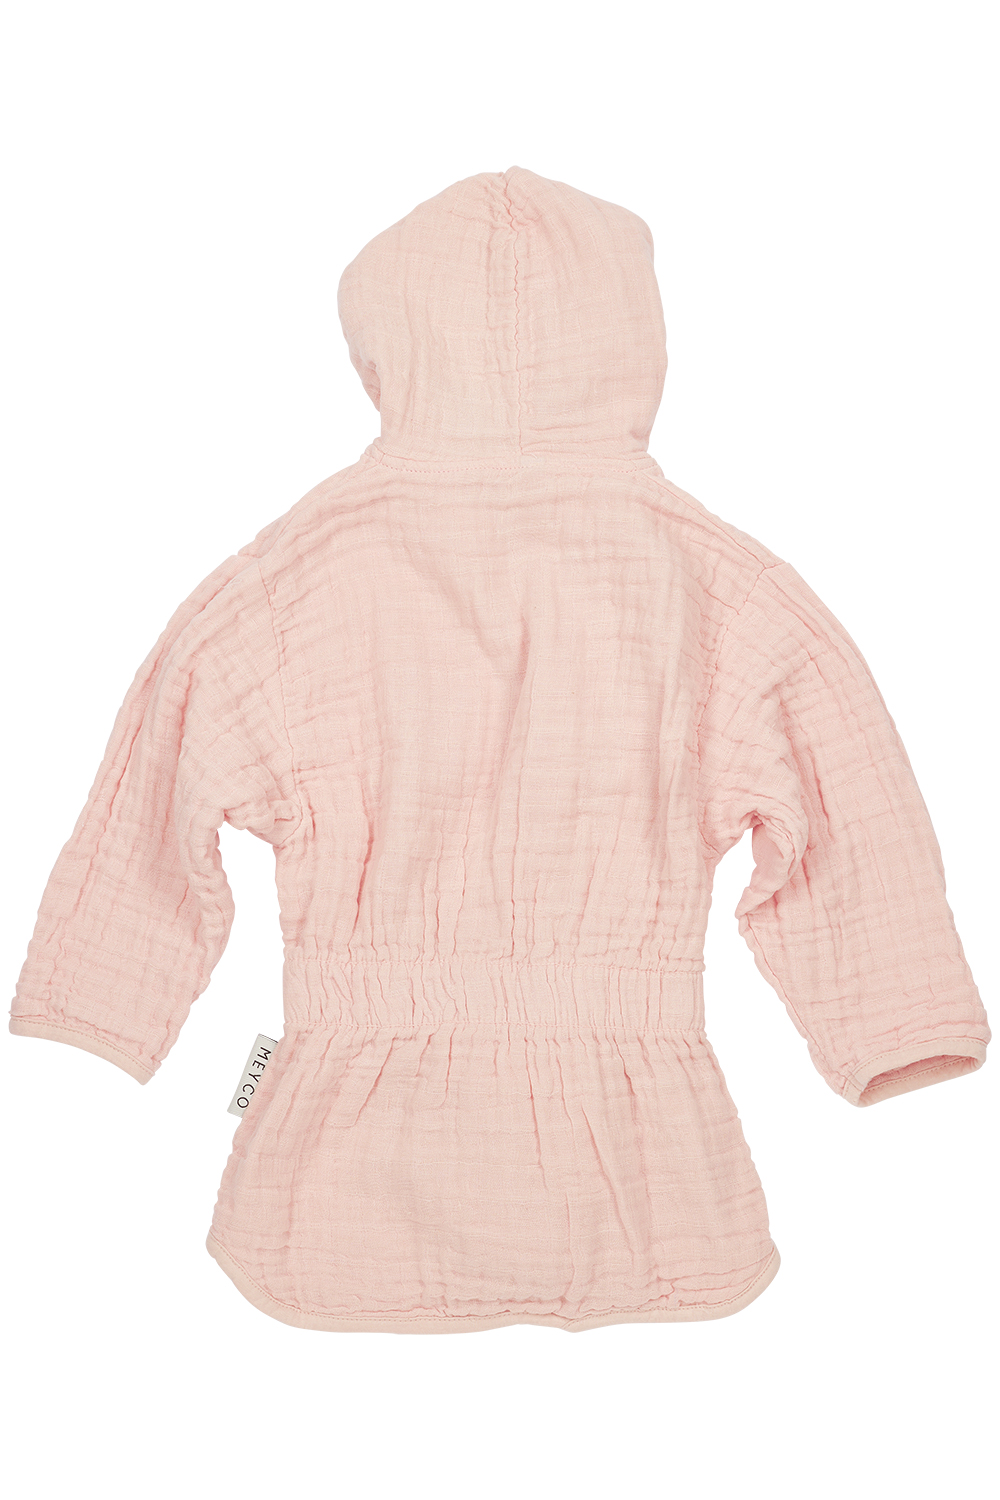 Bademantel pre-washed musselin Uni - soft pink - 98/104